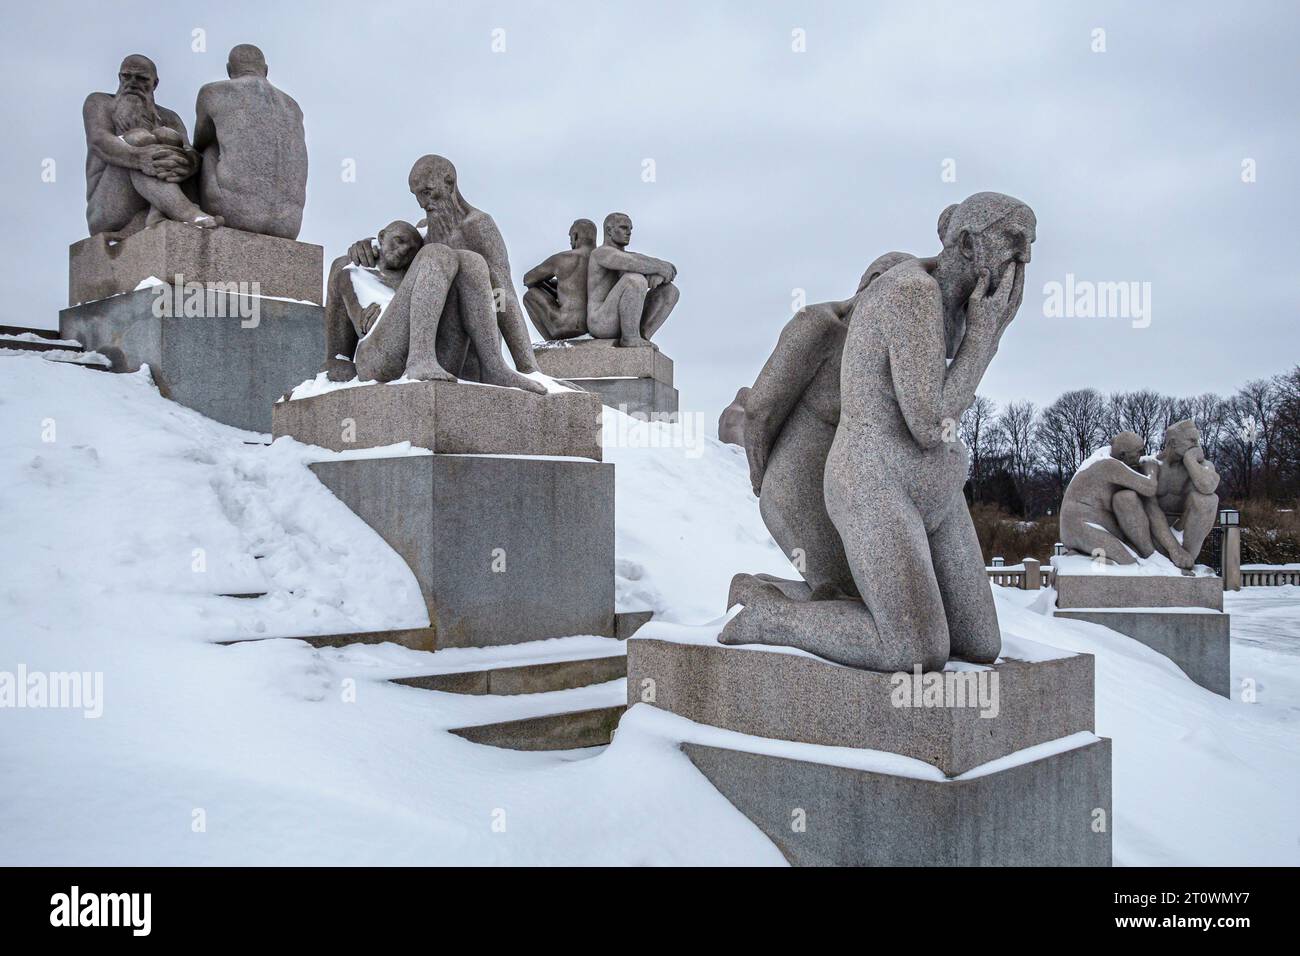 Sculptures by Gustav Vigeland at the Vigeland Installation in Frogner Park, Oslo, Norway Stock Photo